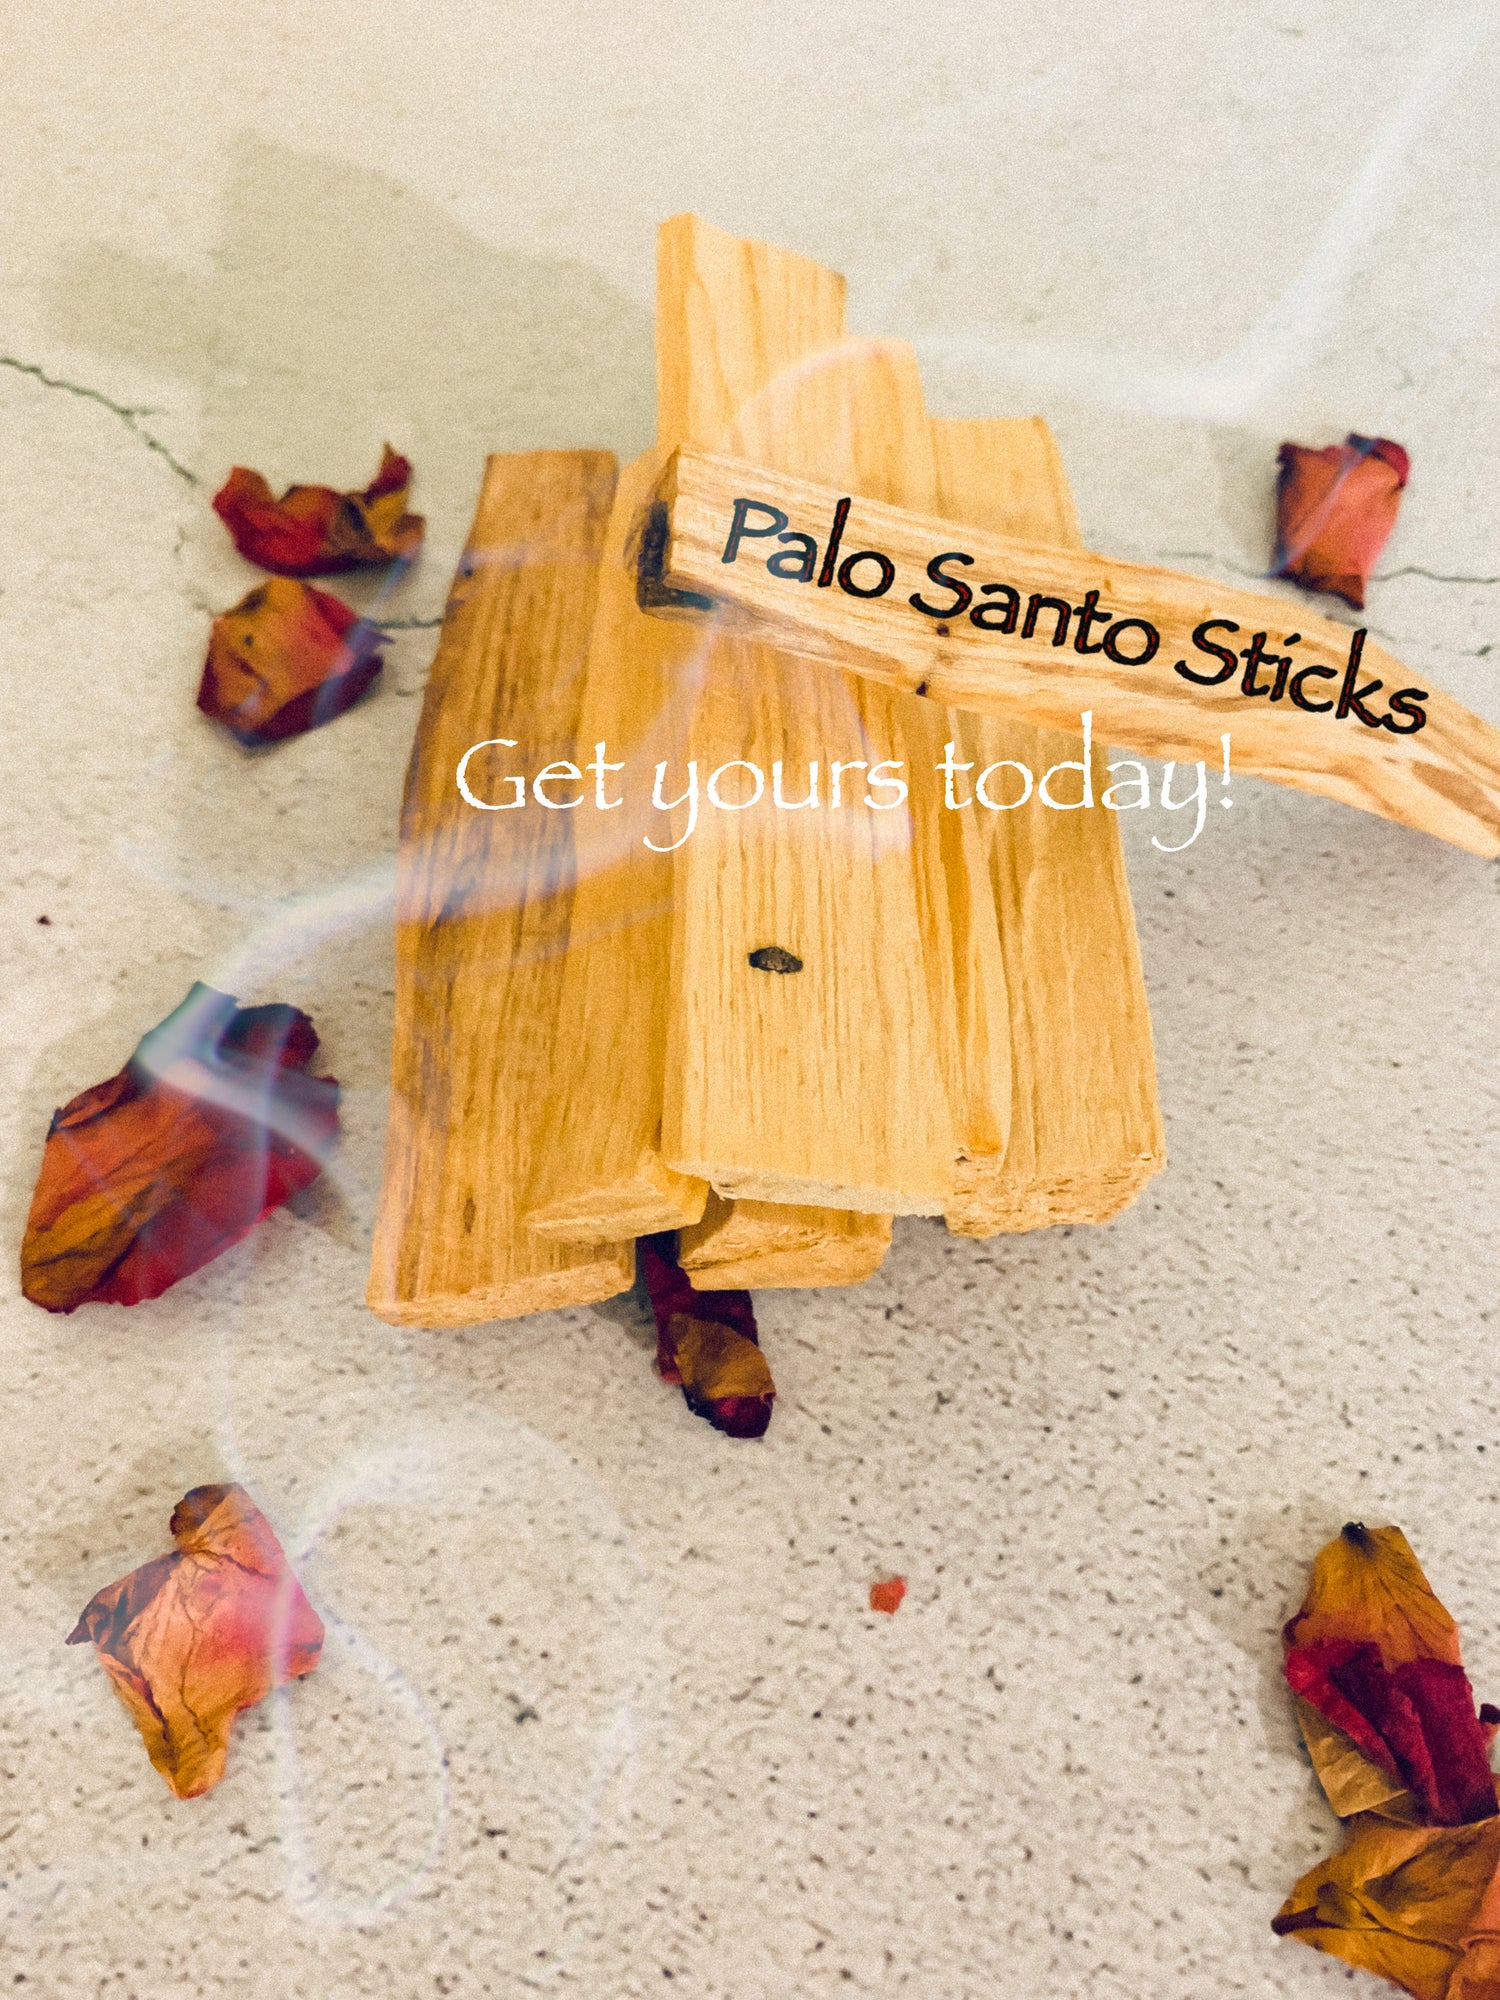 Palo Santo Smudging Sticks used to clear negative energy from personal spaces.  Palo Santo Sticks can be used for meditation practices, yoga sessions, and many more.